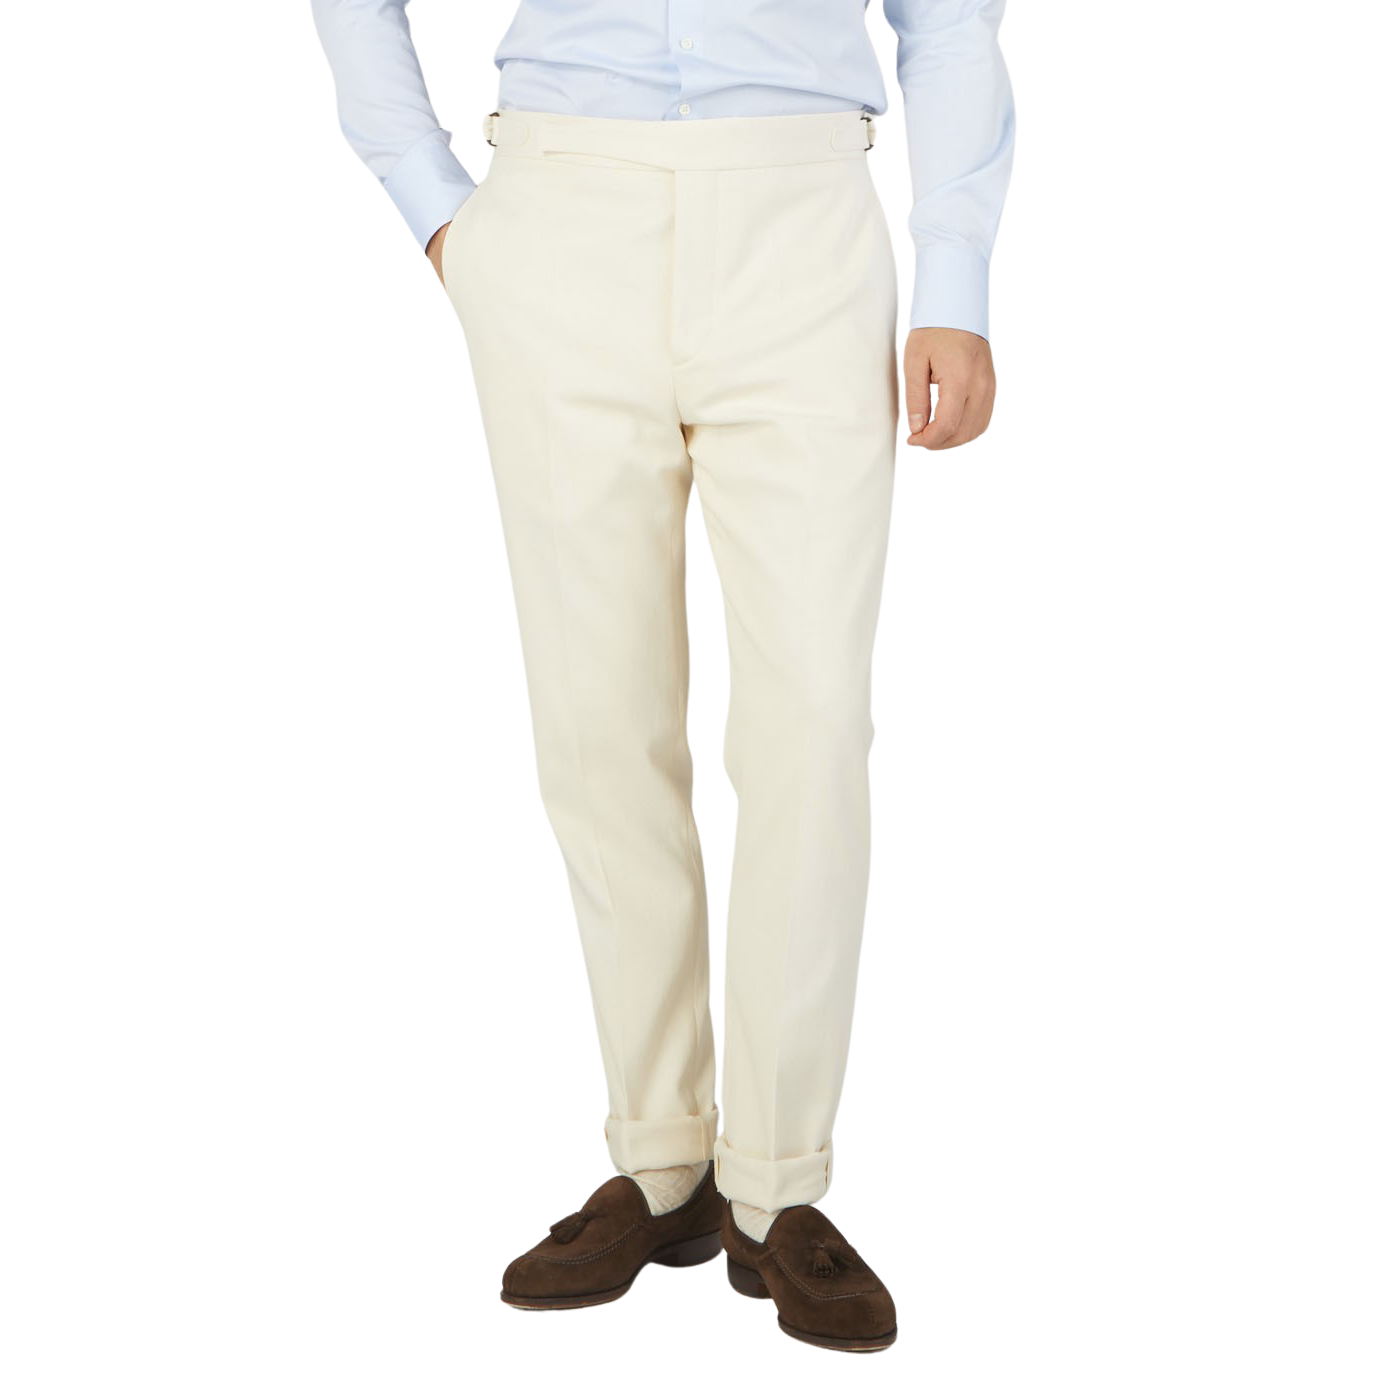 Buy Blue Trousers & Pants for Men by Monte Carlo Online | Ajio.com